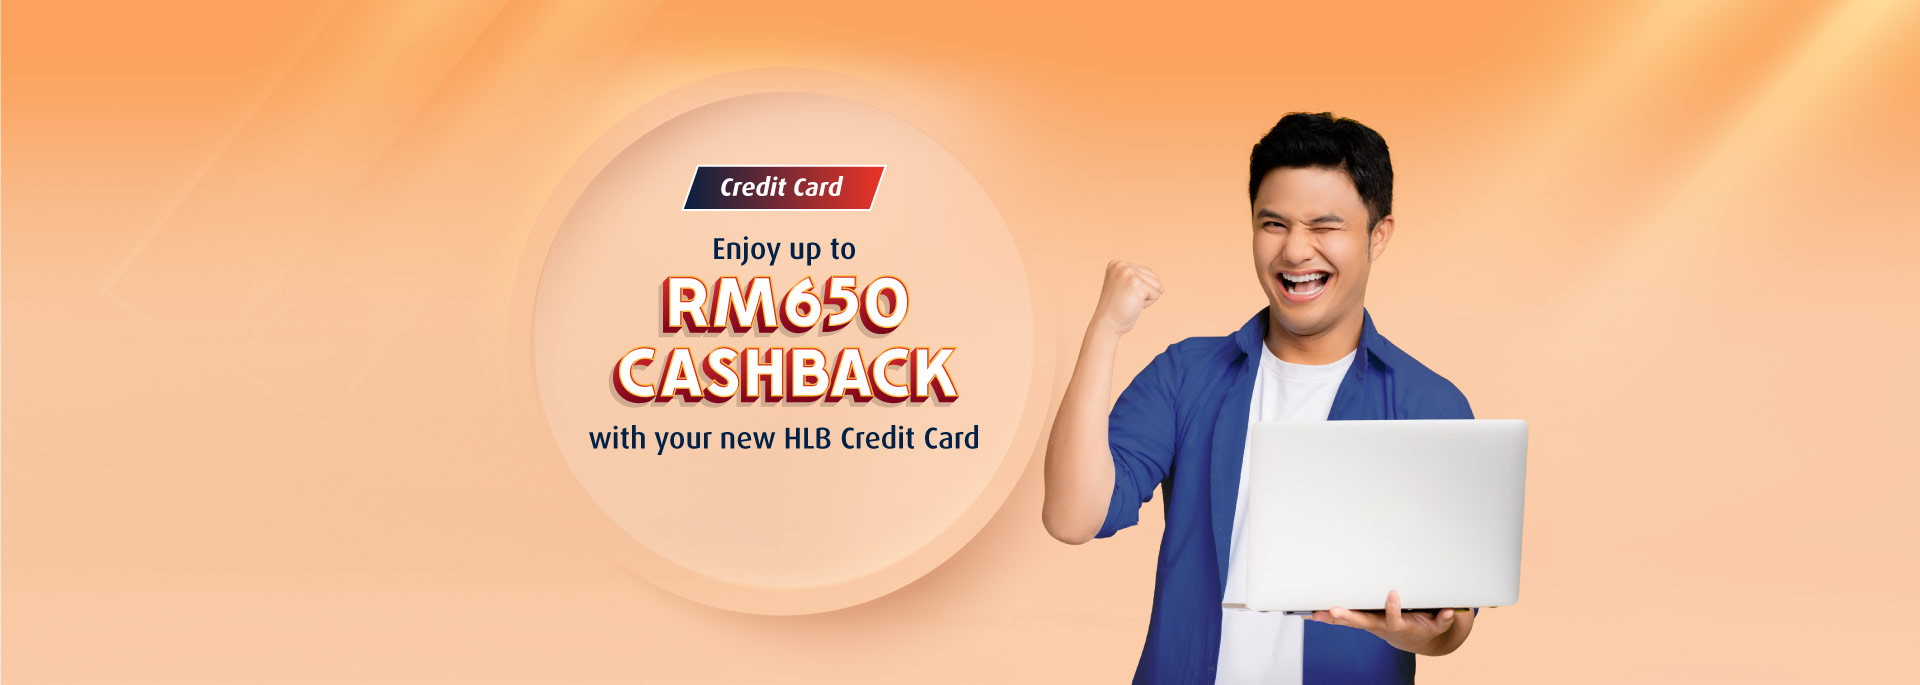 Enjoy up to RM650 cashback with your new HLB Credit Card